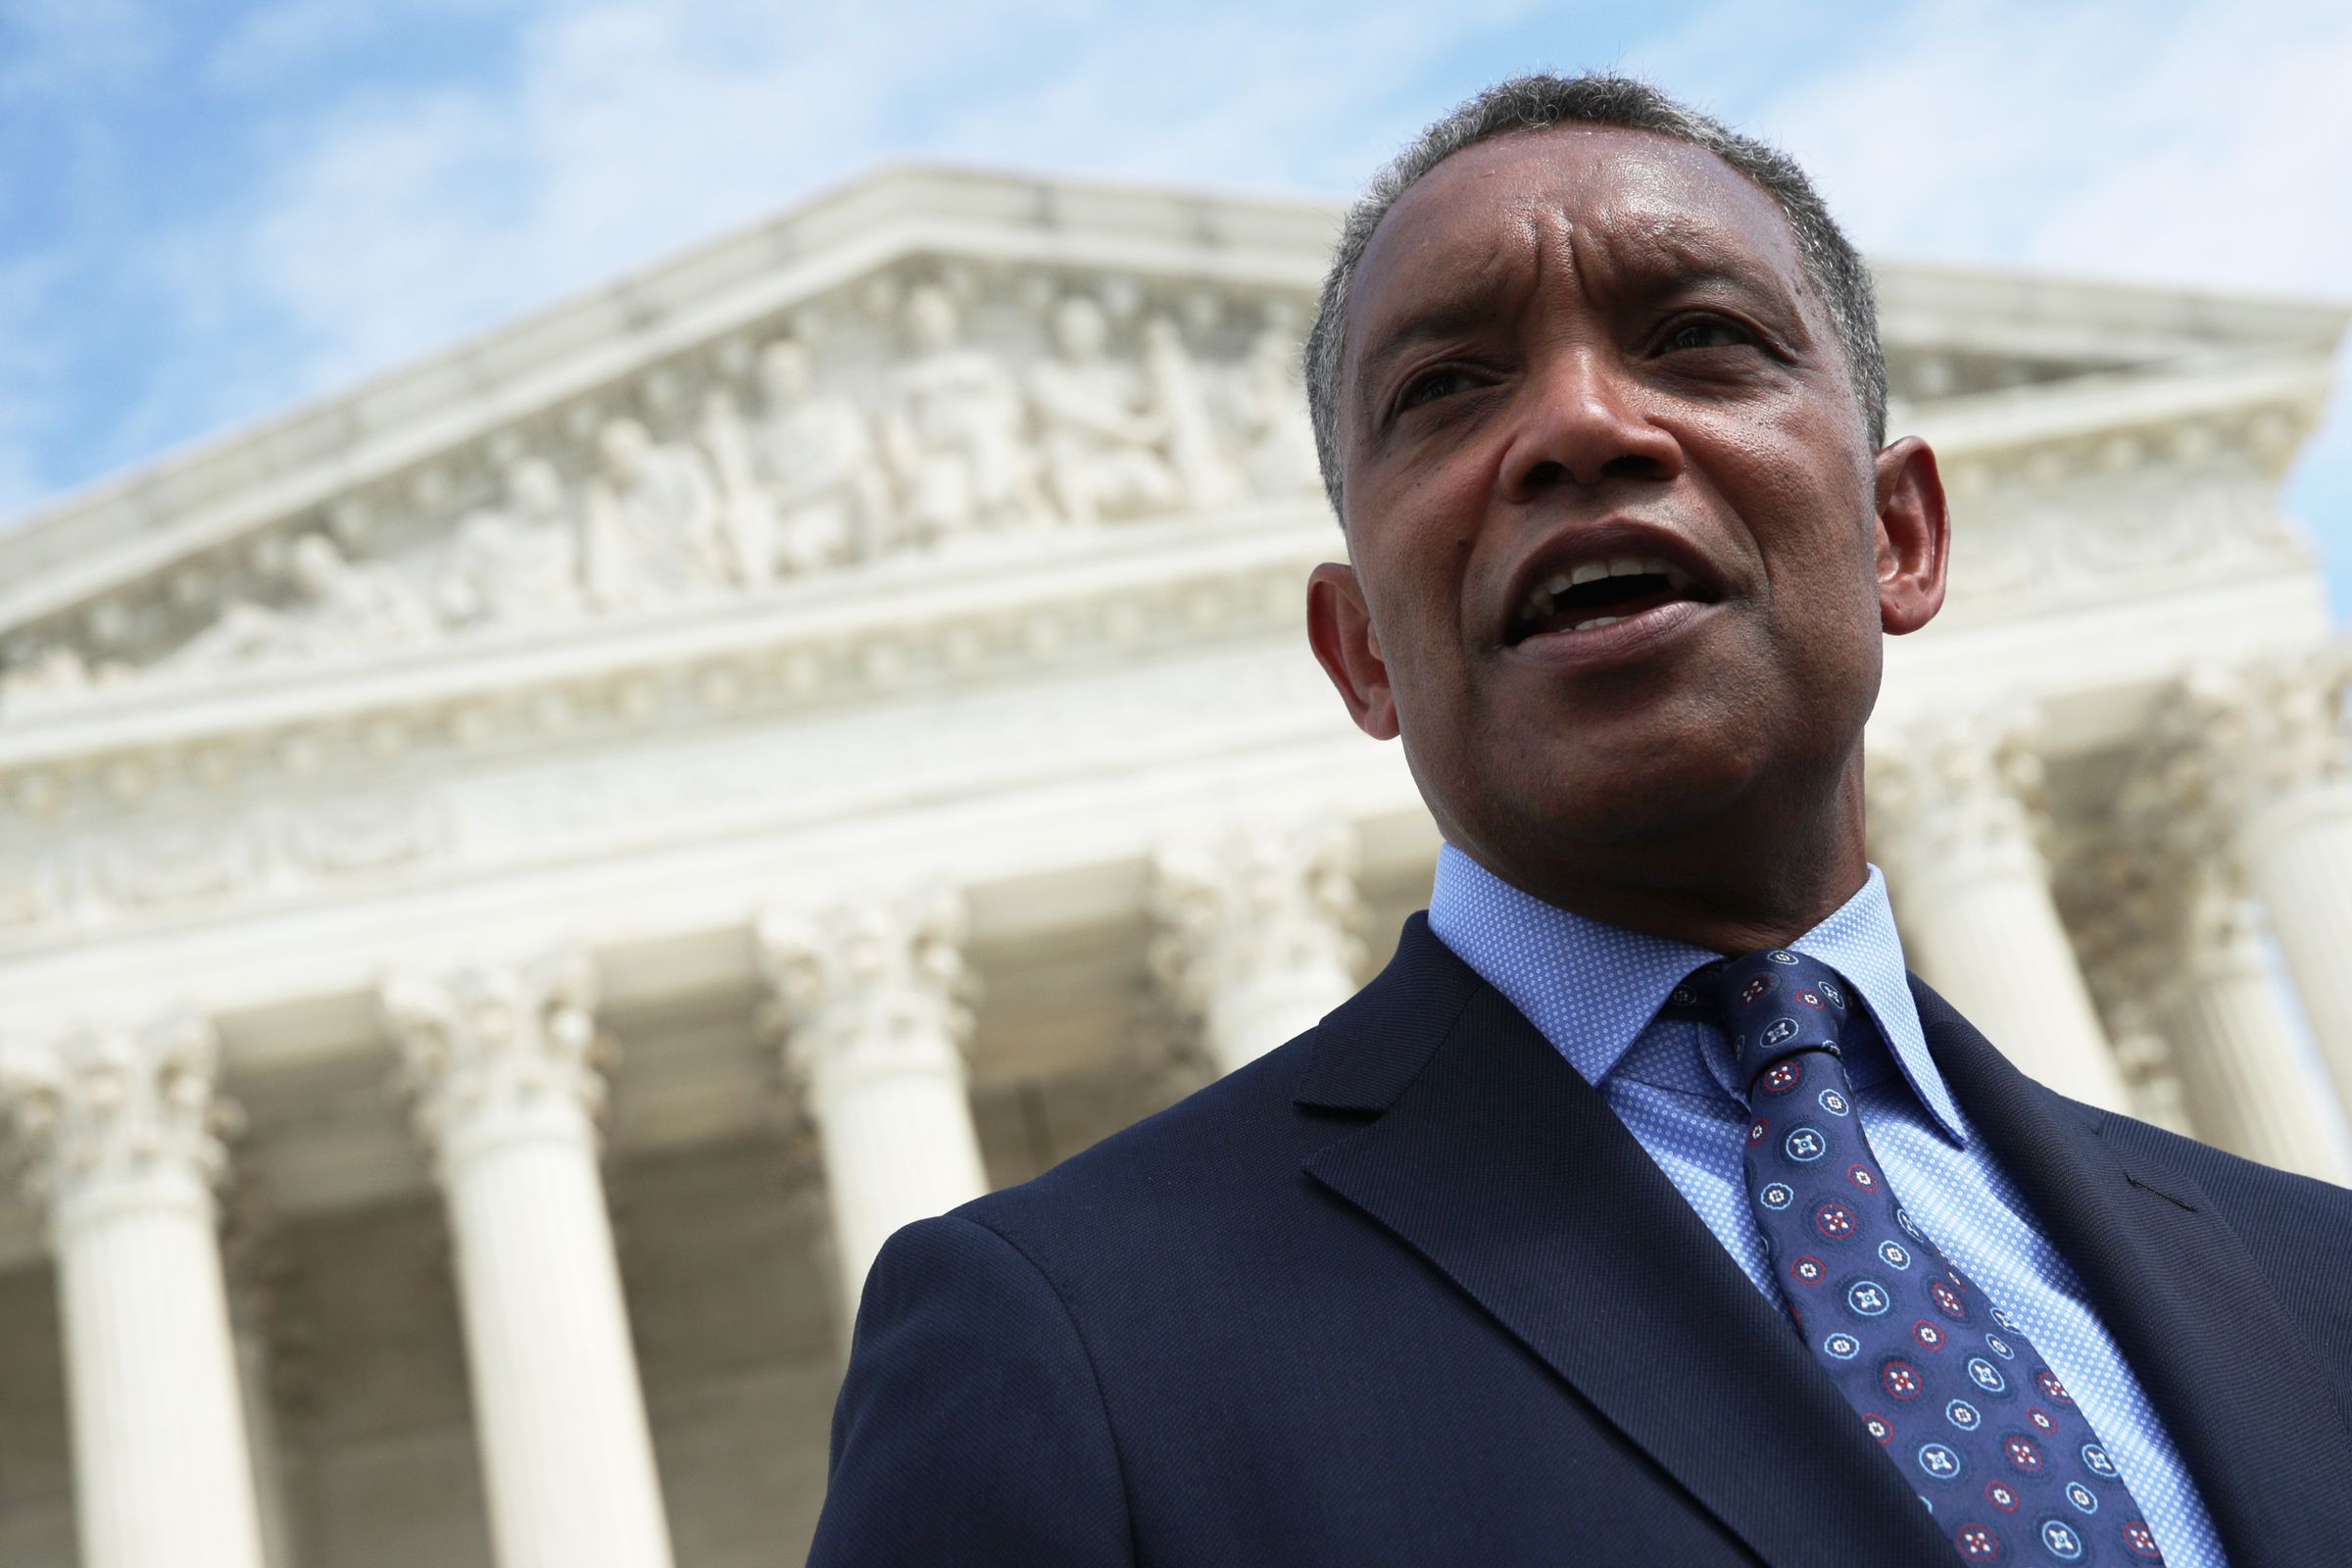 DC Attorney General Karl Racine appears before the US Supreme Court.